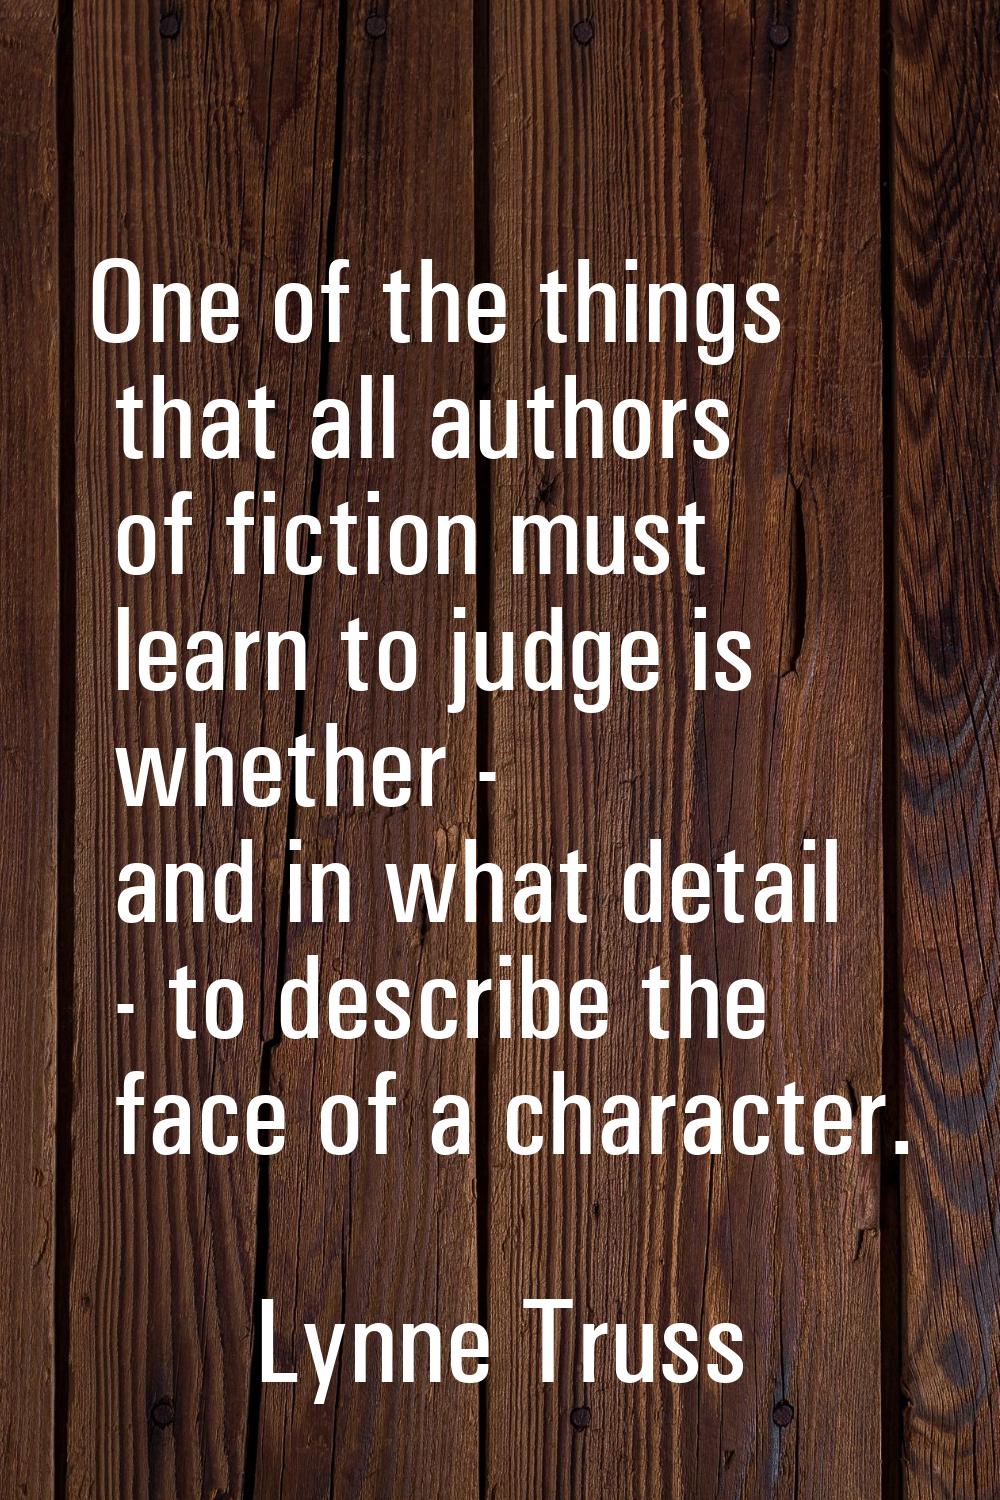 One of the things that all authors of fiction must learn to judge is whether - and in what detail -